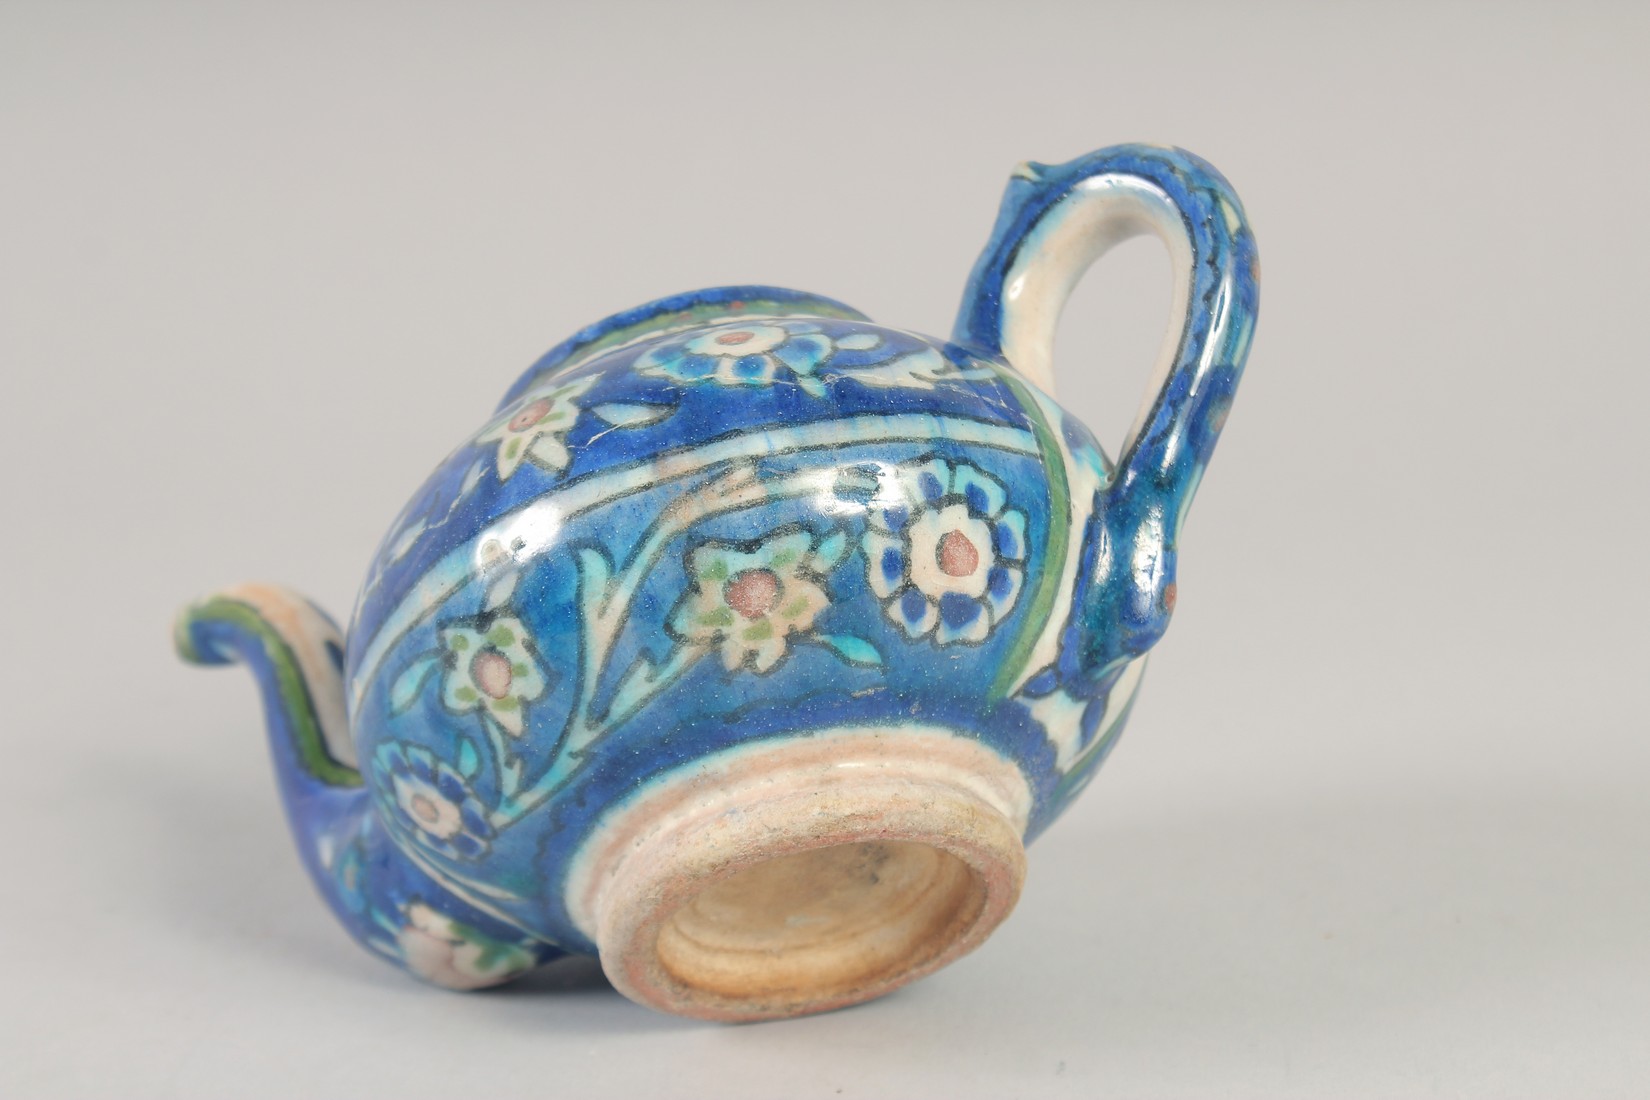 A PALISTINIAN GLAZED POTTERY TEAPOT, with foliate decoration, 19cm spout to handle. - Image 7 of 7